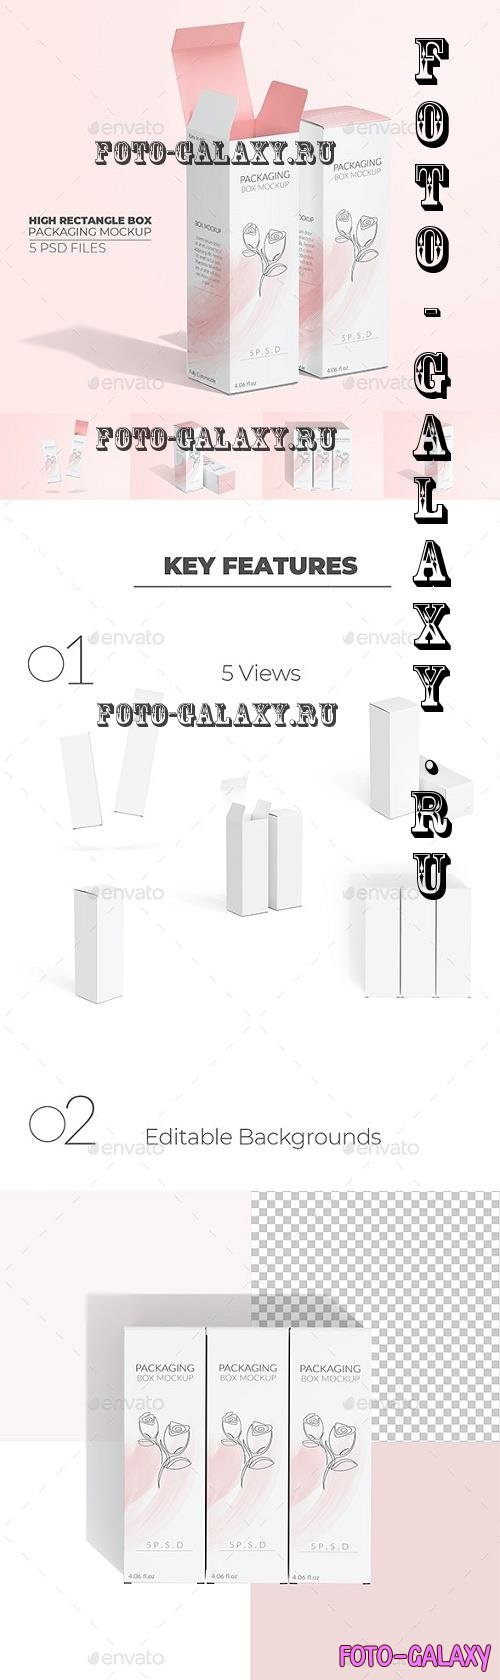 Package Box Mockup  High/Tall Rectangle - 33613756 - 6888782